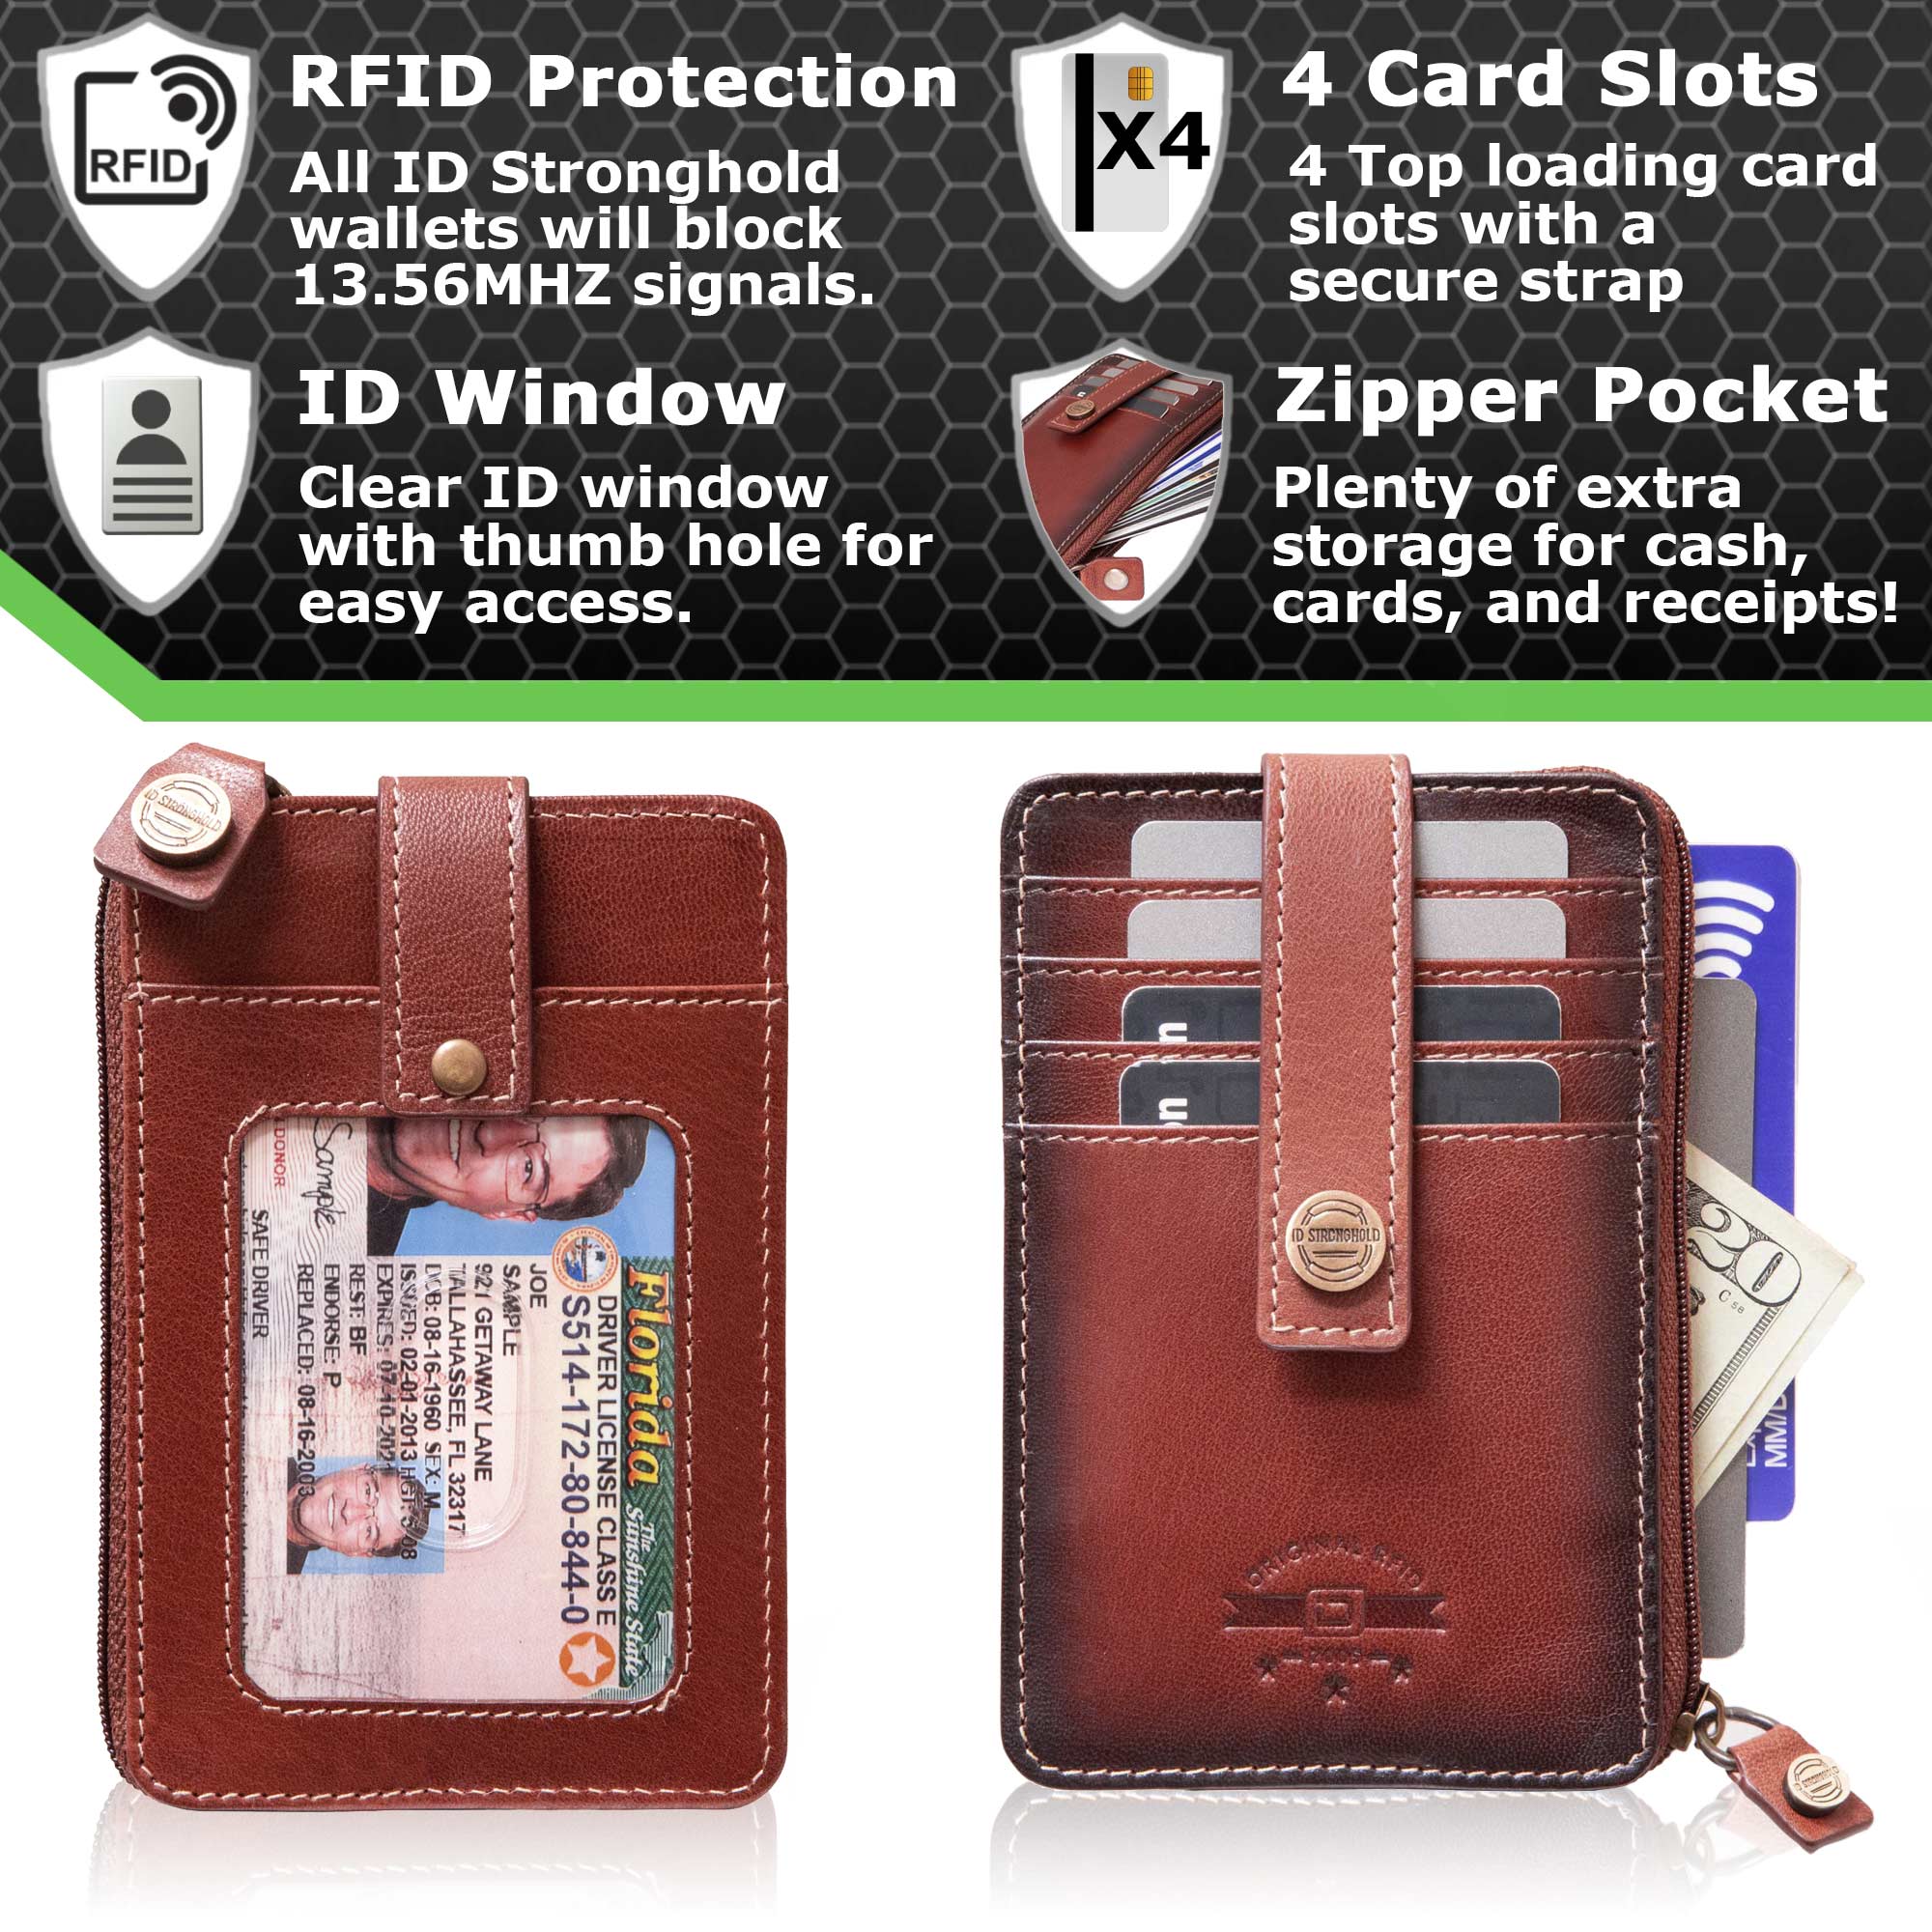 There Are Plenty Of RFID-Blocking Products, But Do You Need Them